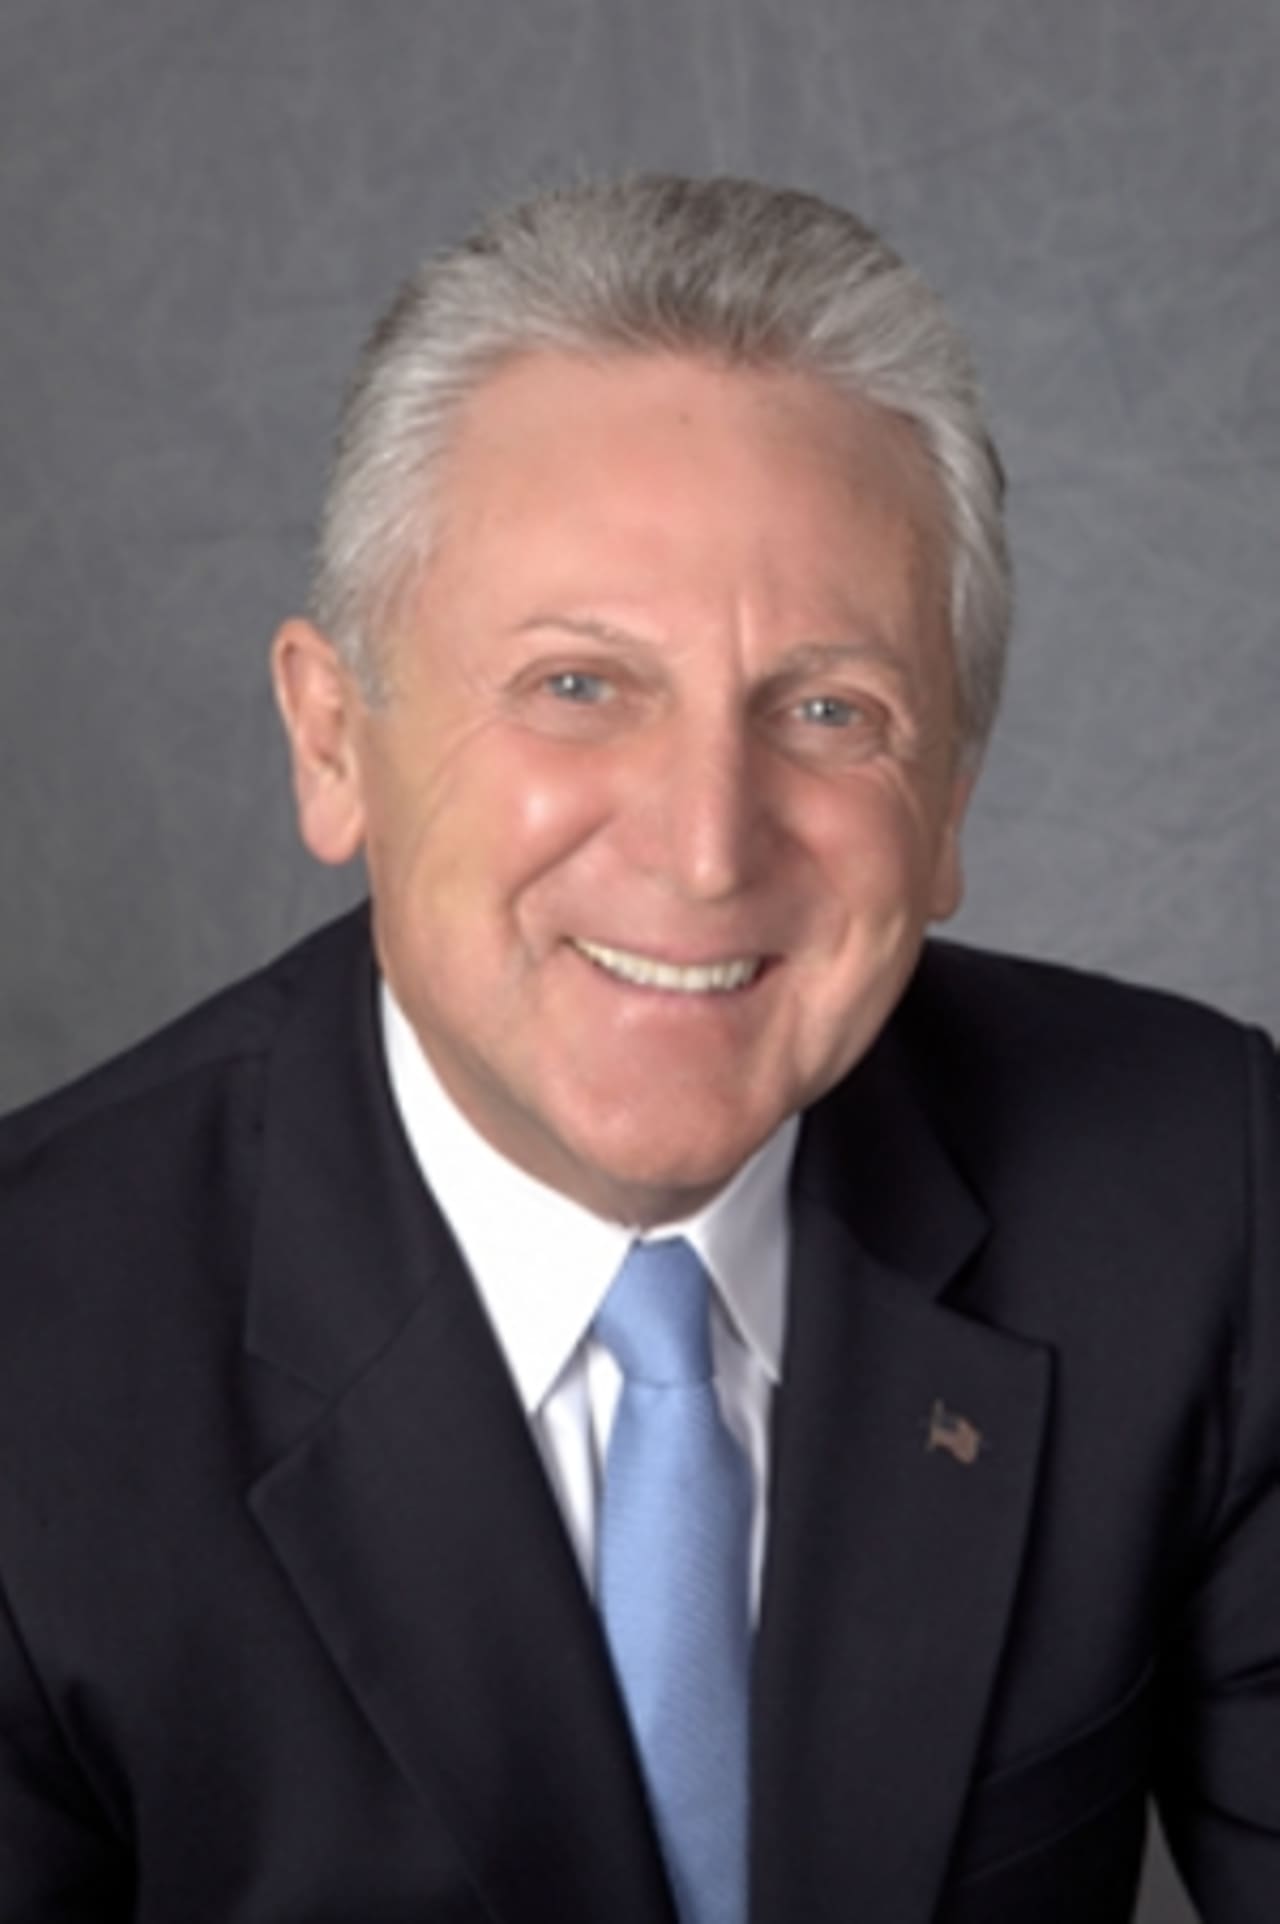 Norwalk Mayor Harry Rilling is inviting residents to take a walk with him and other officials Saturday through the Silvermine area in an effort to kick off a new walking club in the historic area.